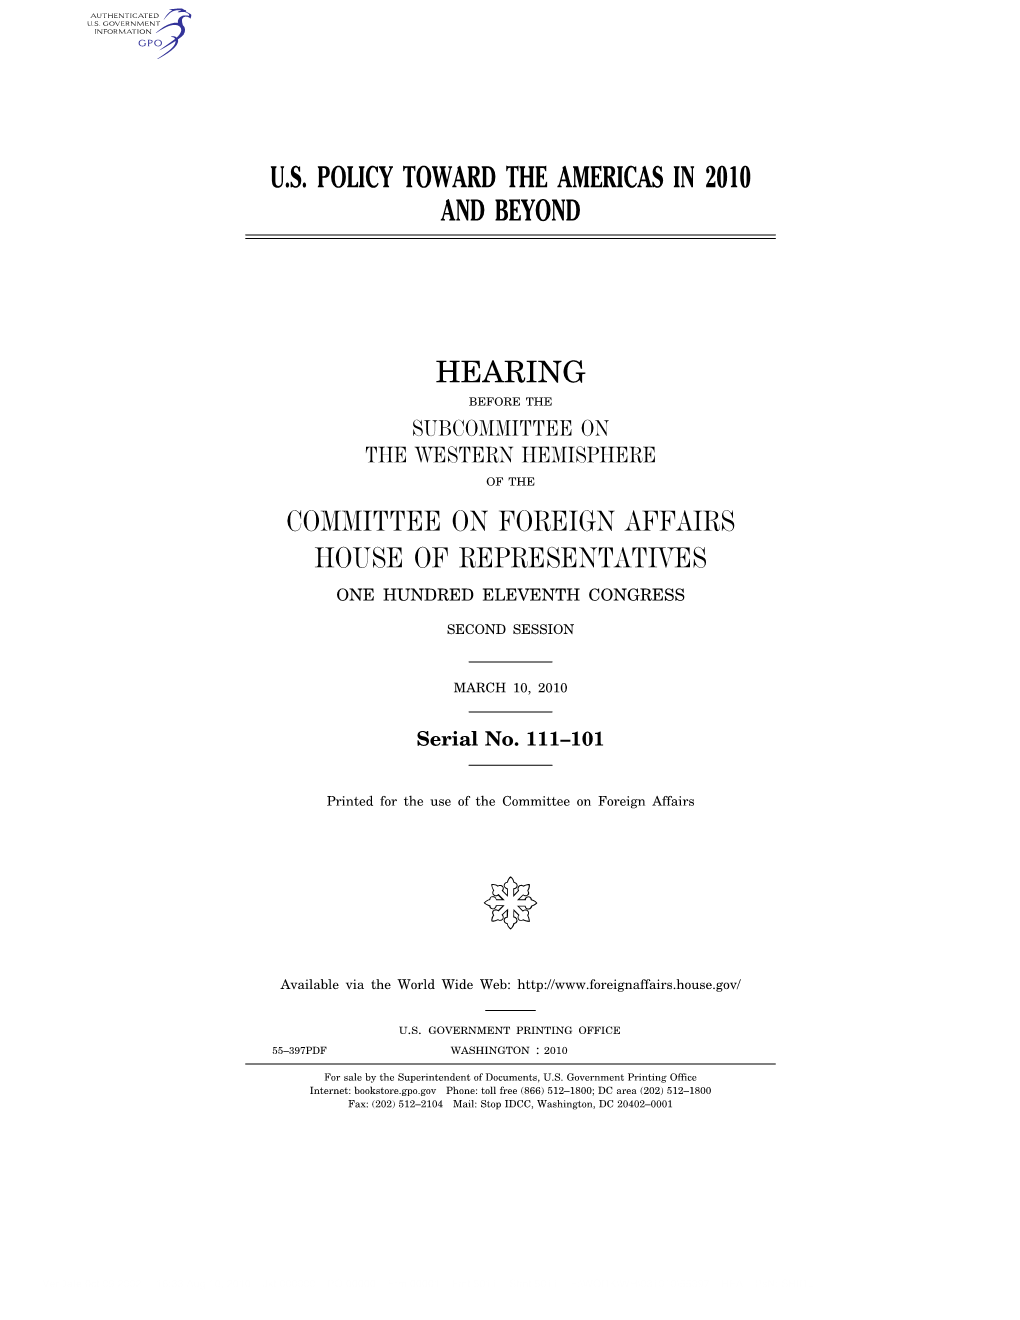 U.S. Policy Toward the Americas in 2010 and Beyond